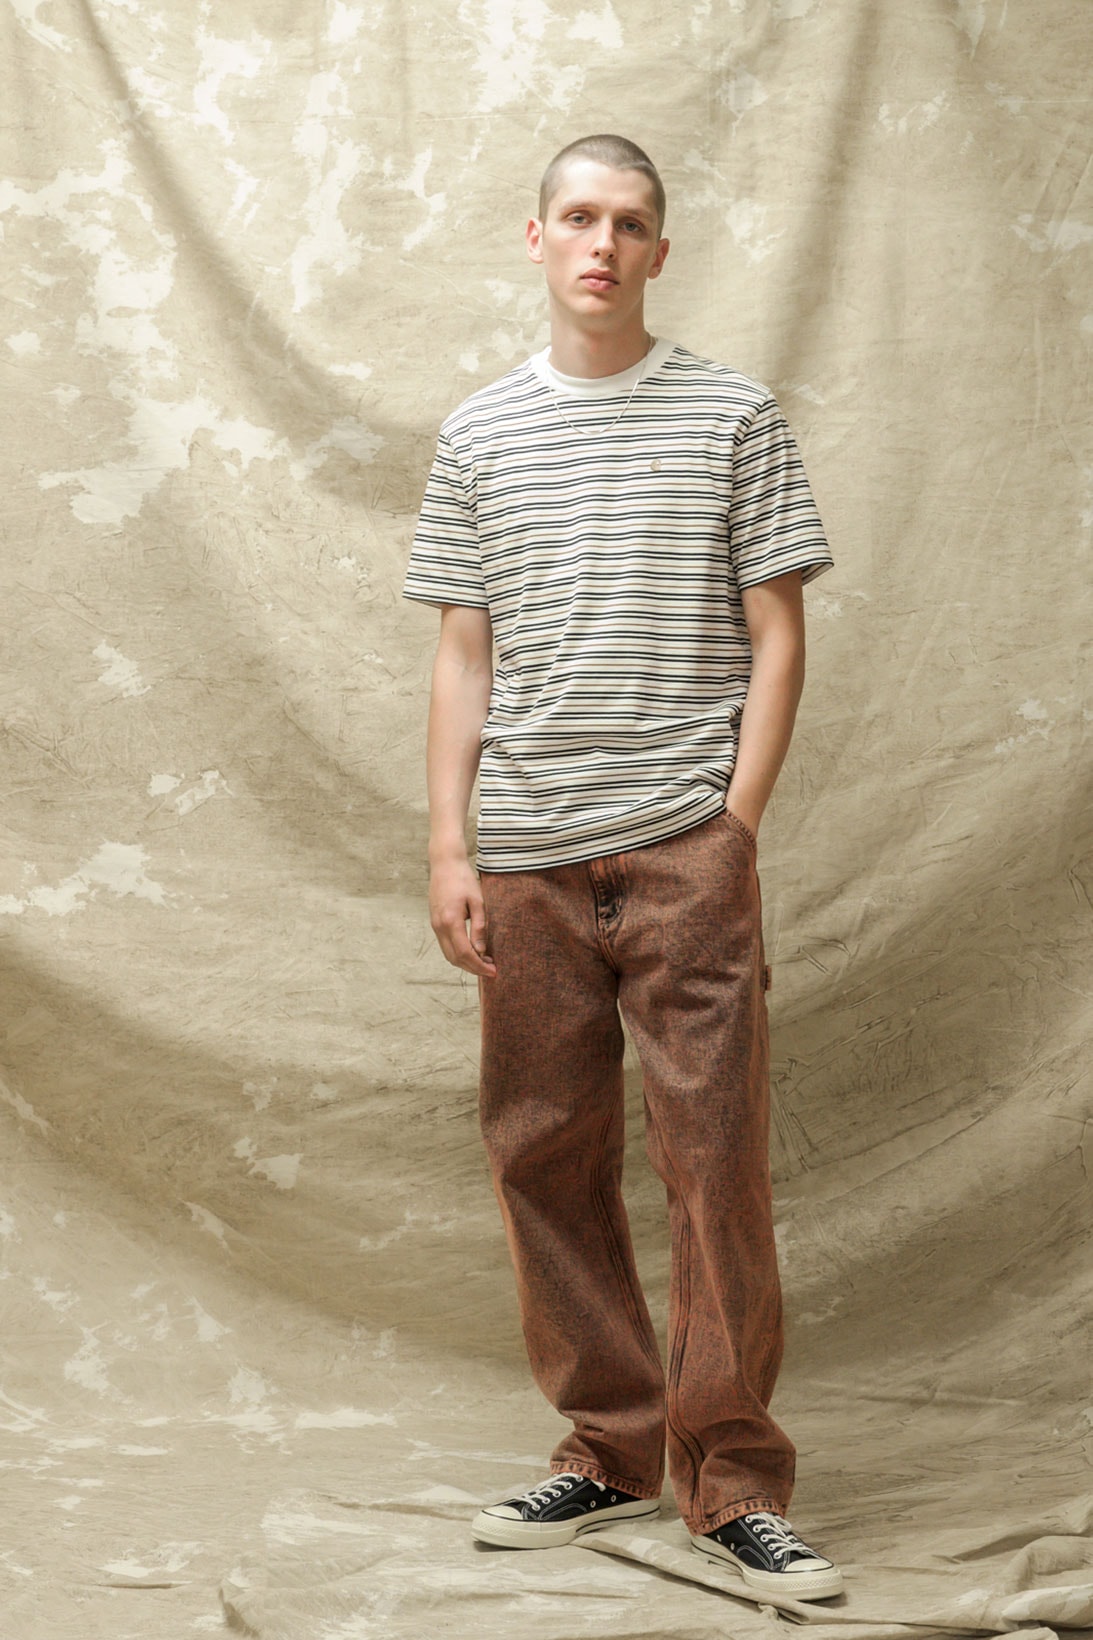 carhartt wip spring summer 2021 ss21 collection lookbook striped t-shirt washed jeans